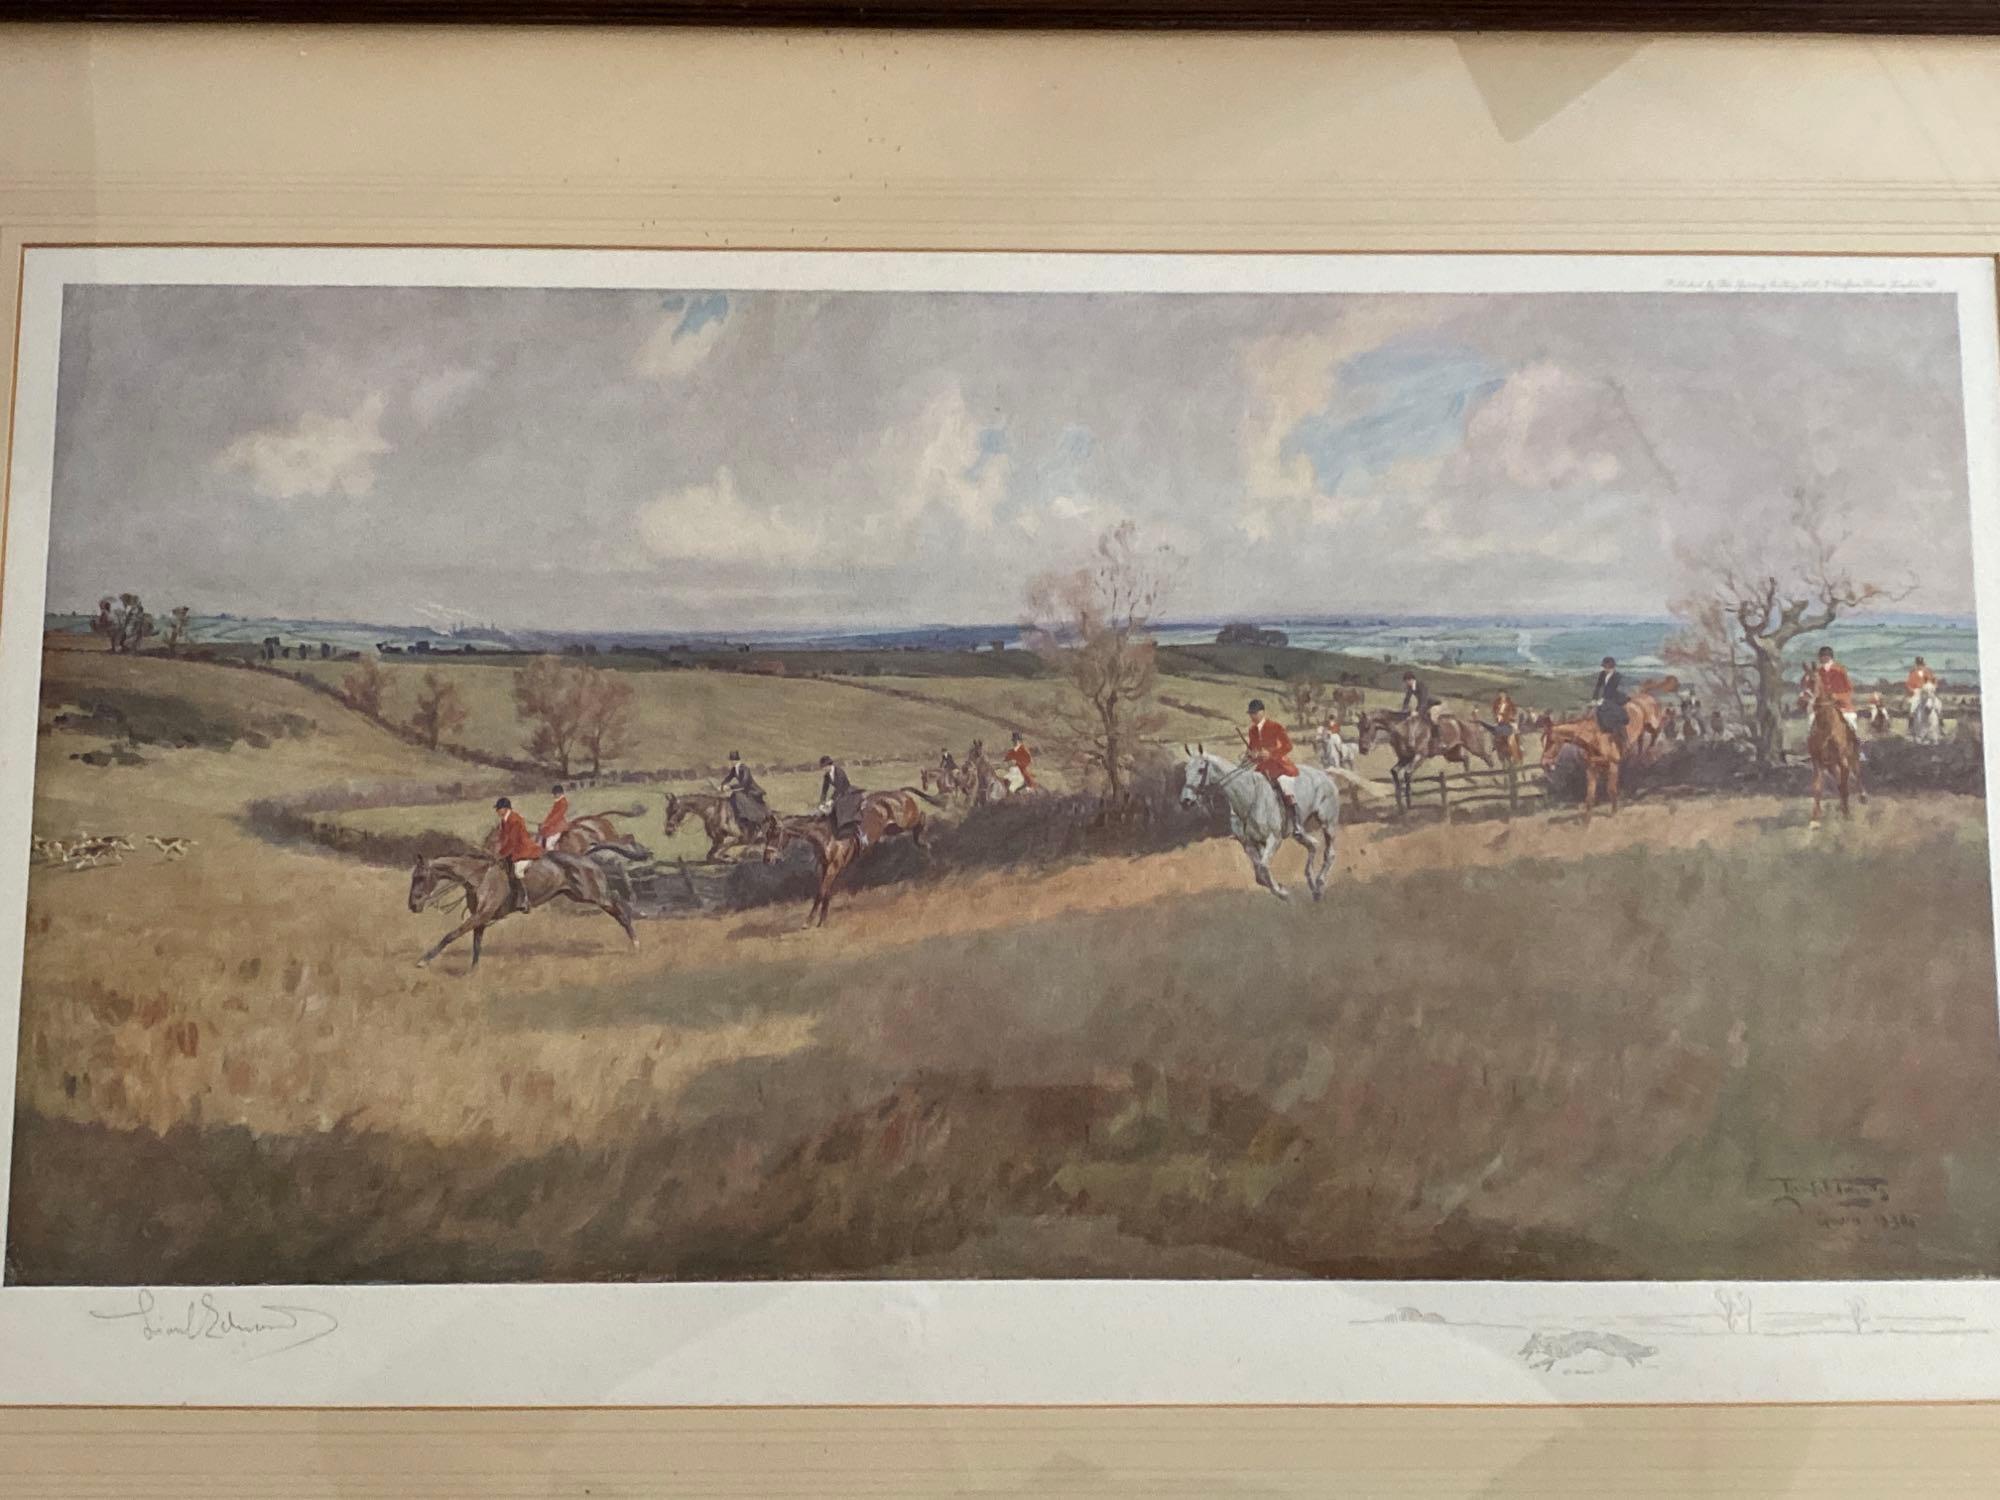 From the estate of the late Ivor Herbert - Framed and glazed Lionel Edwards print of The Quorn 1934